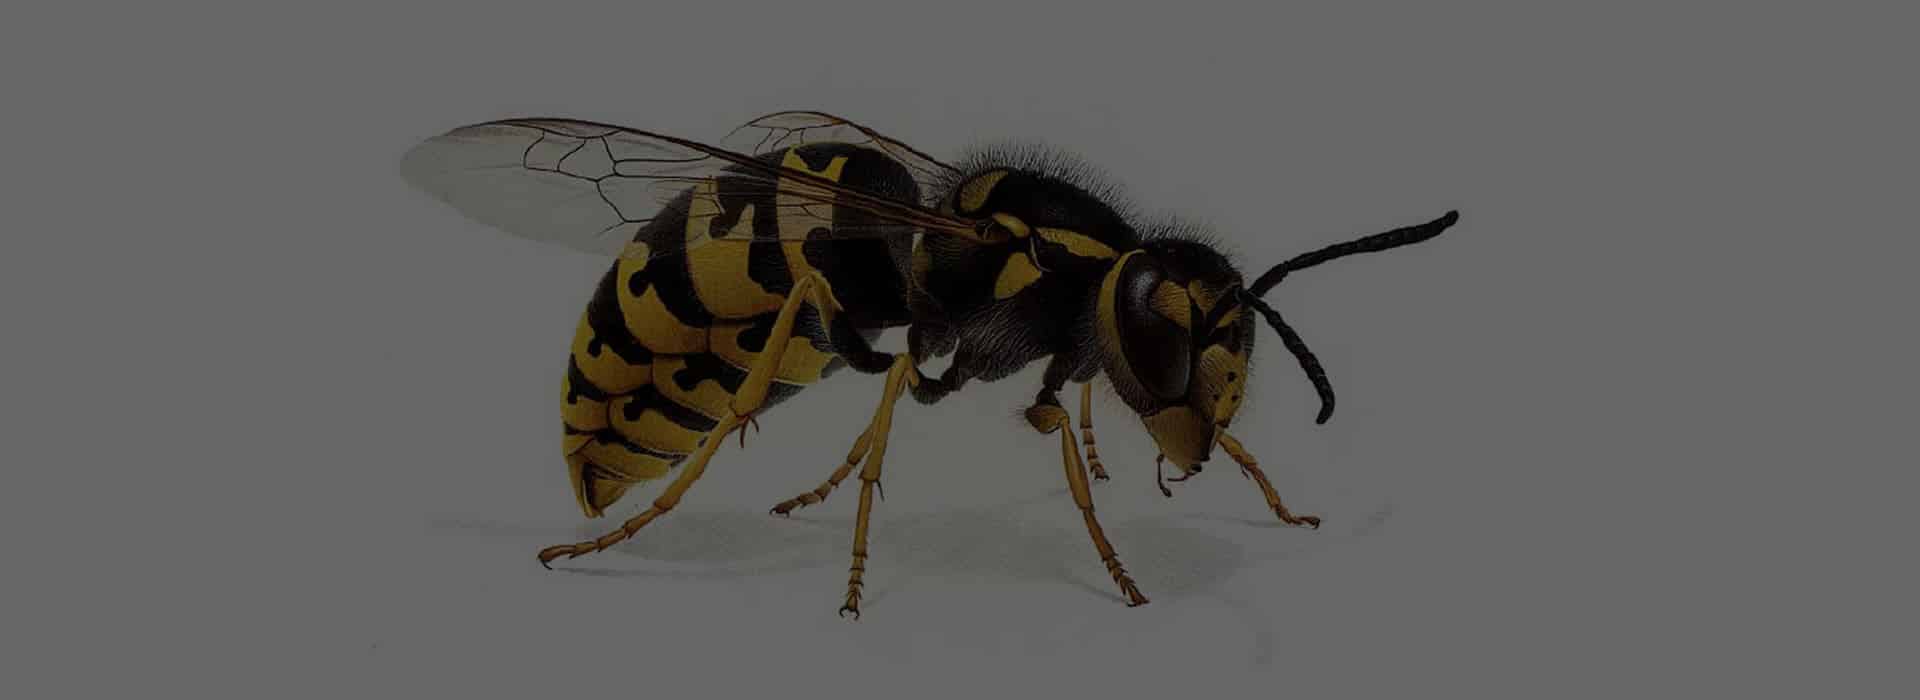 Pest-Control-St-Helens-Wasp-Nest-Removal